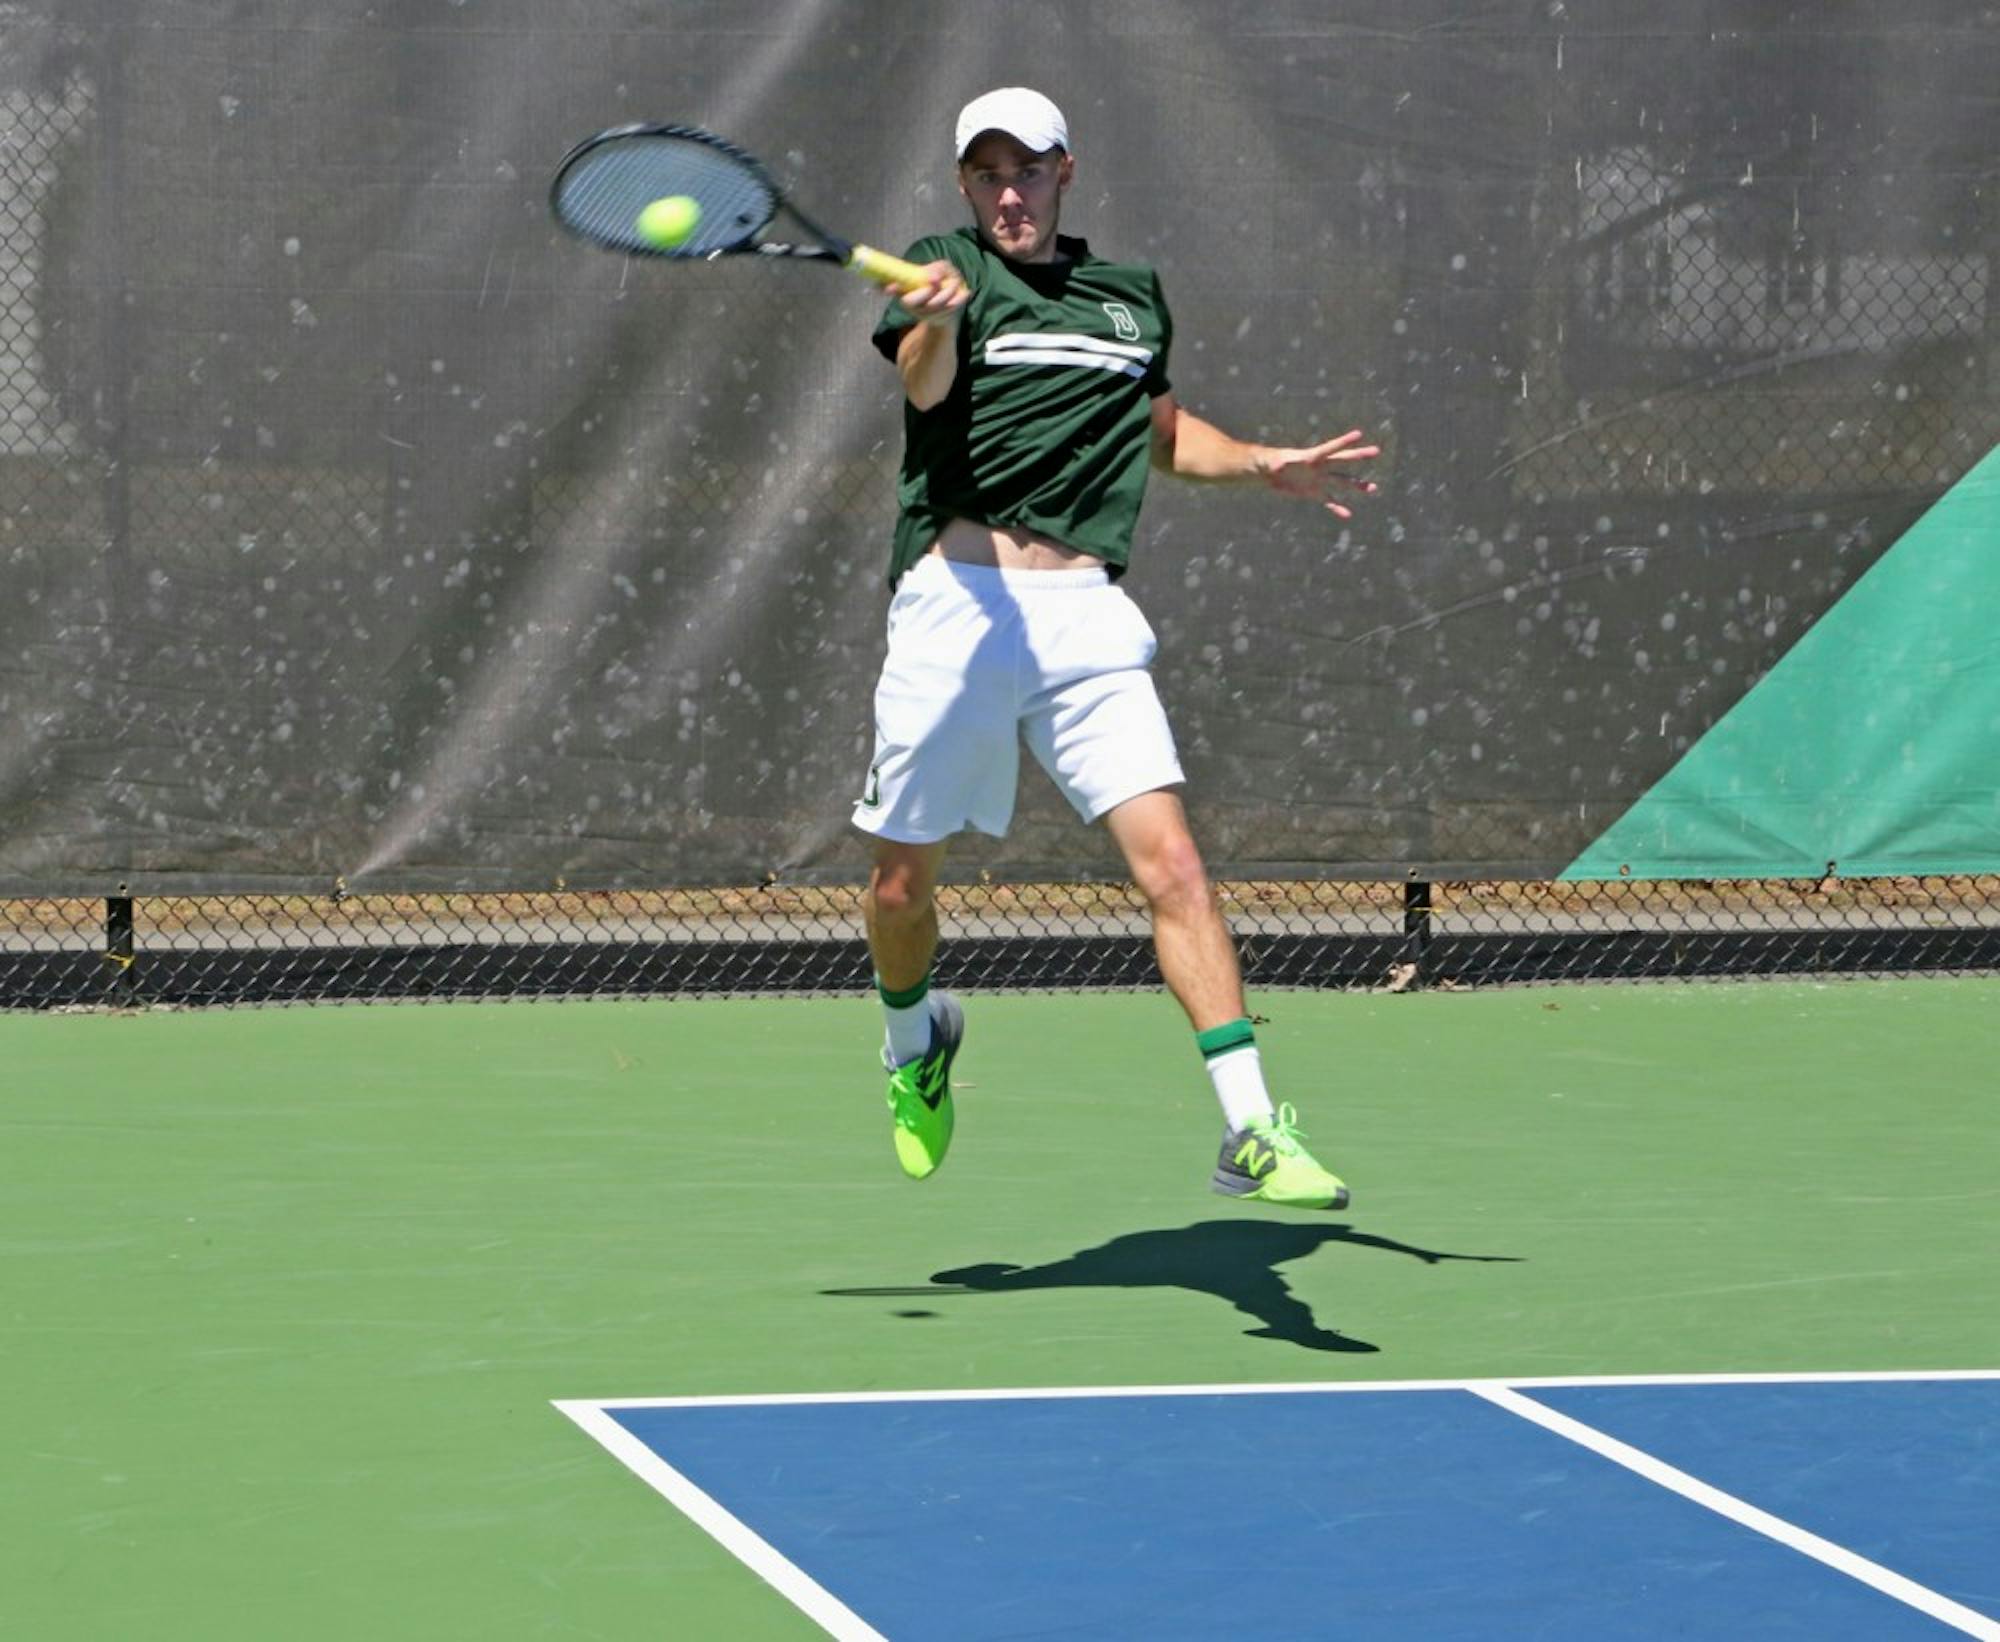 The men’s tennis team has won its last four matches, all against Ivy opponents.